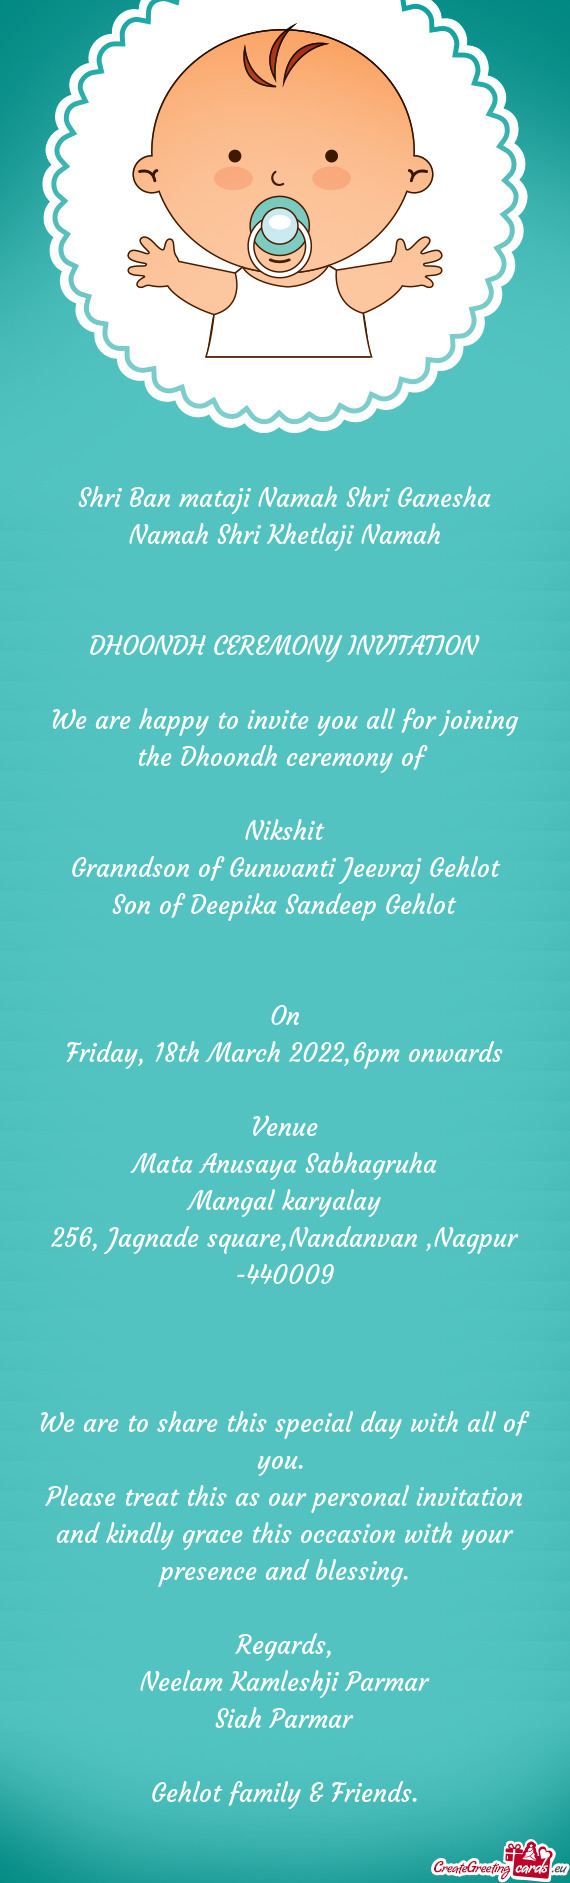 We are happy to invite you all for joining the Dhoondh ceremony of